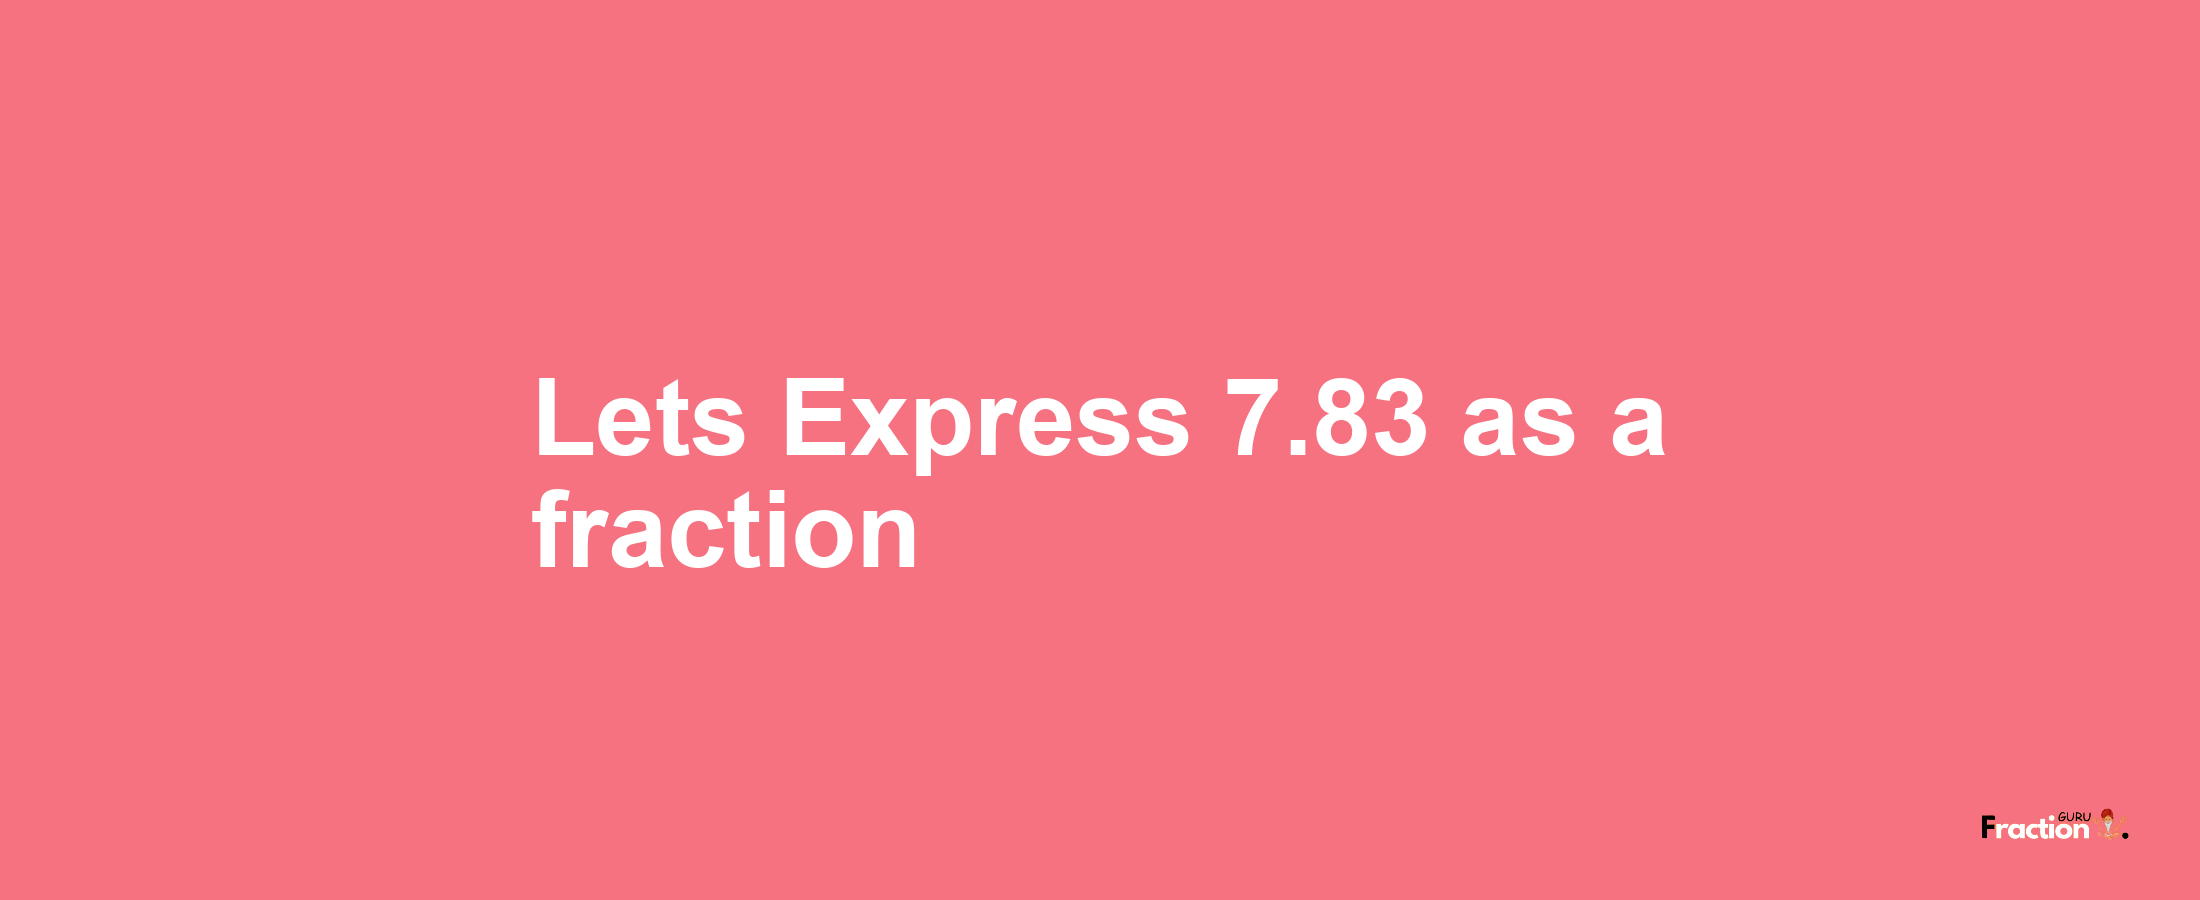 Lets Express 7.83 as afraction